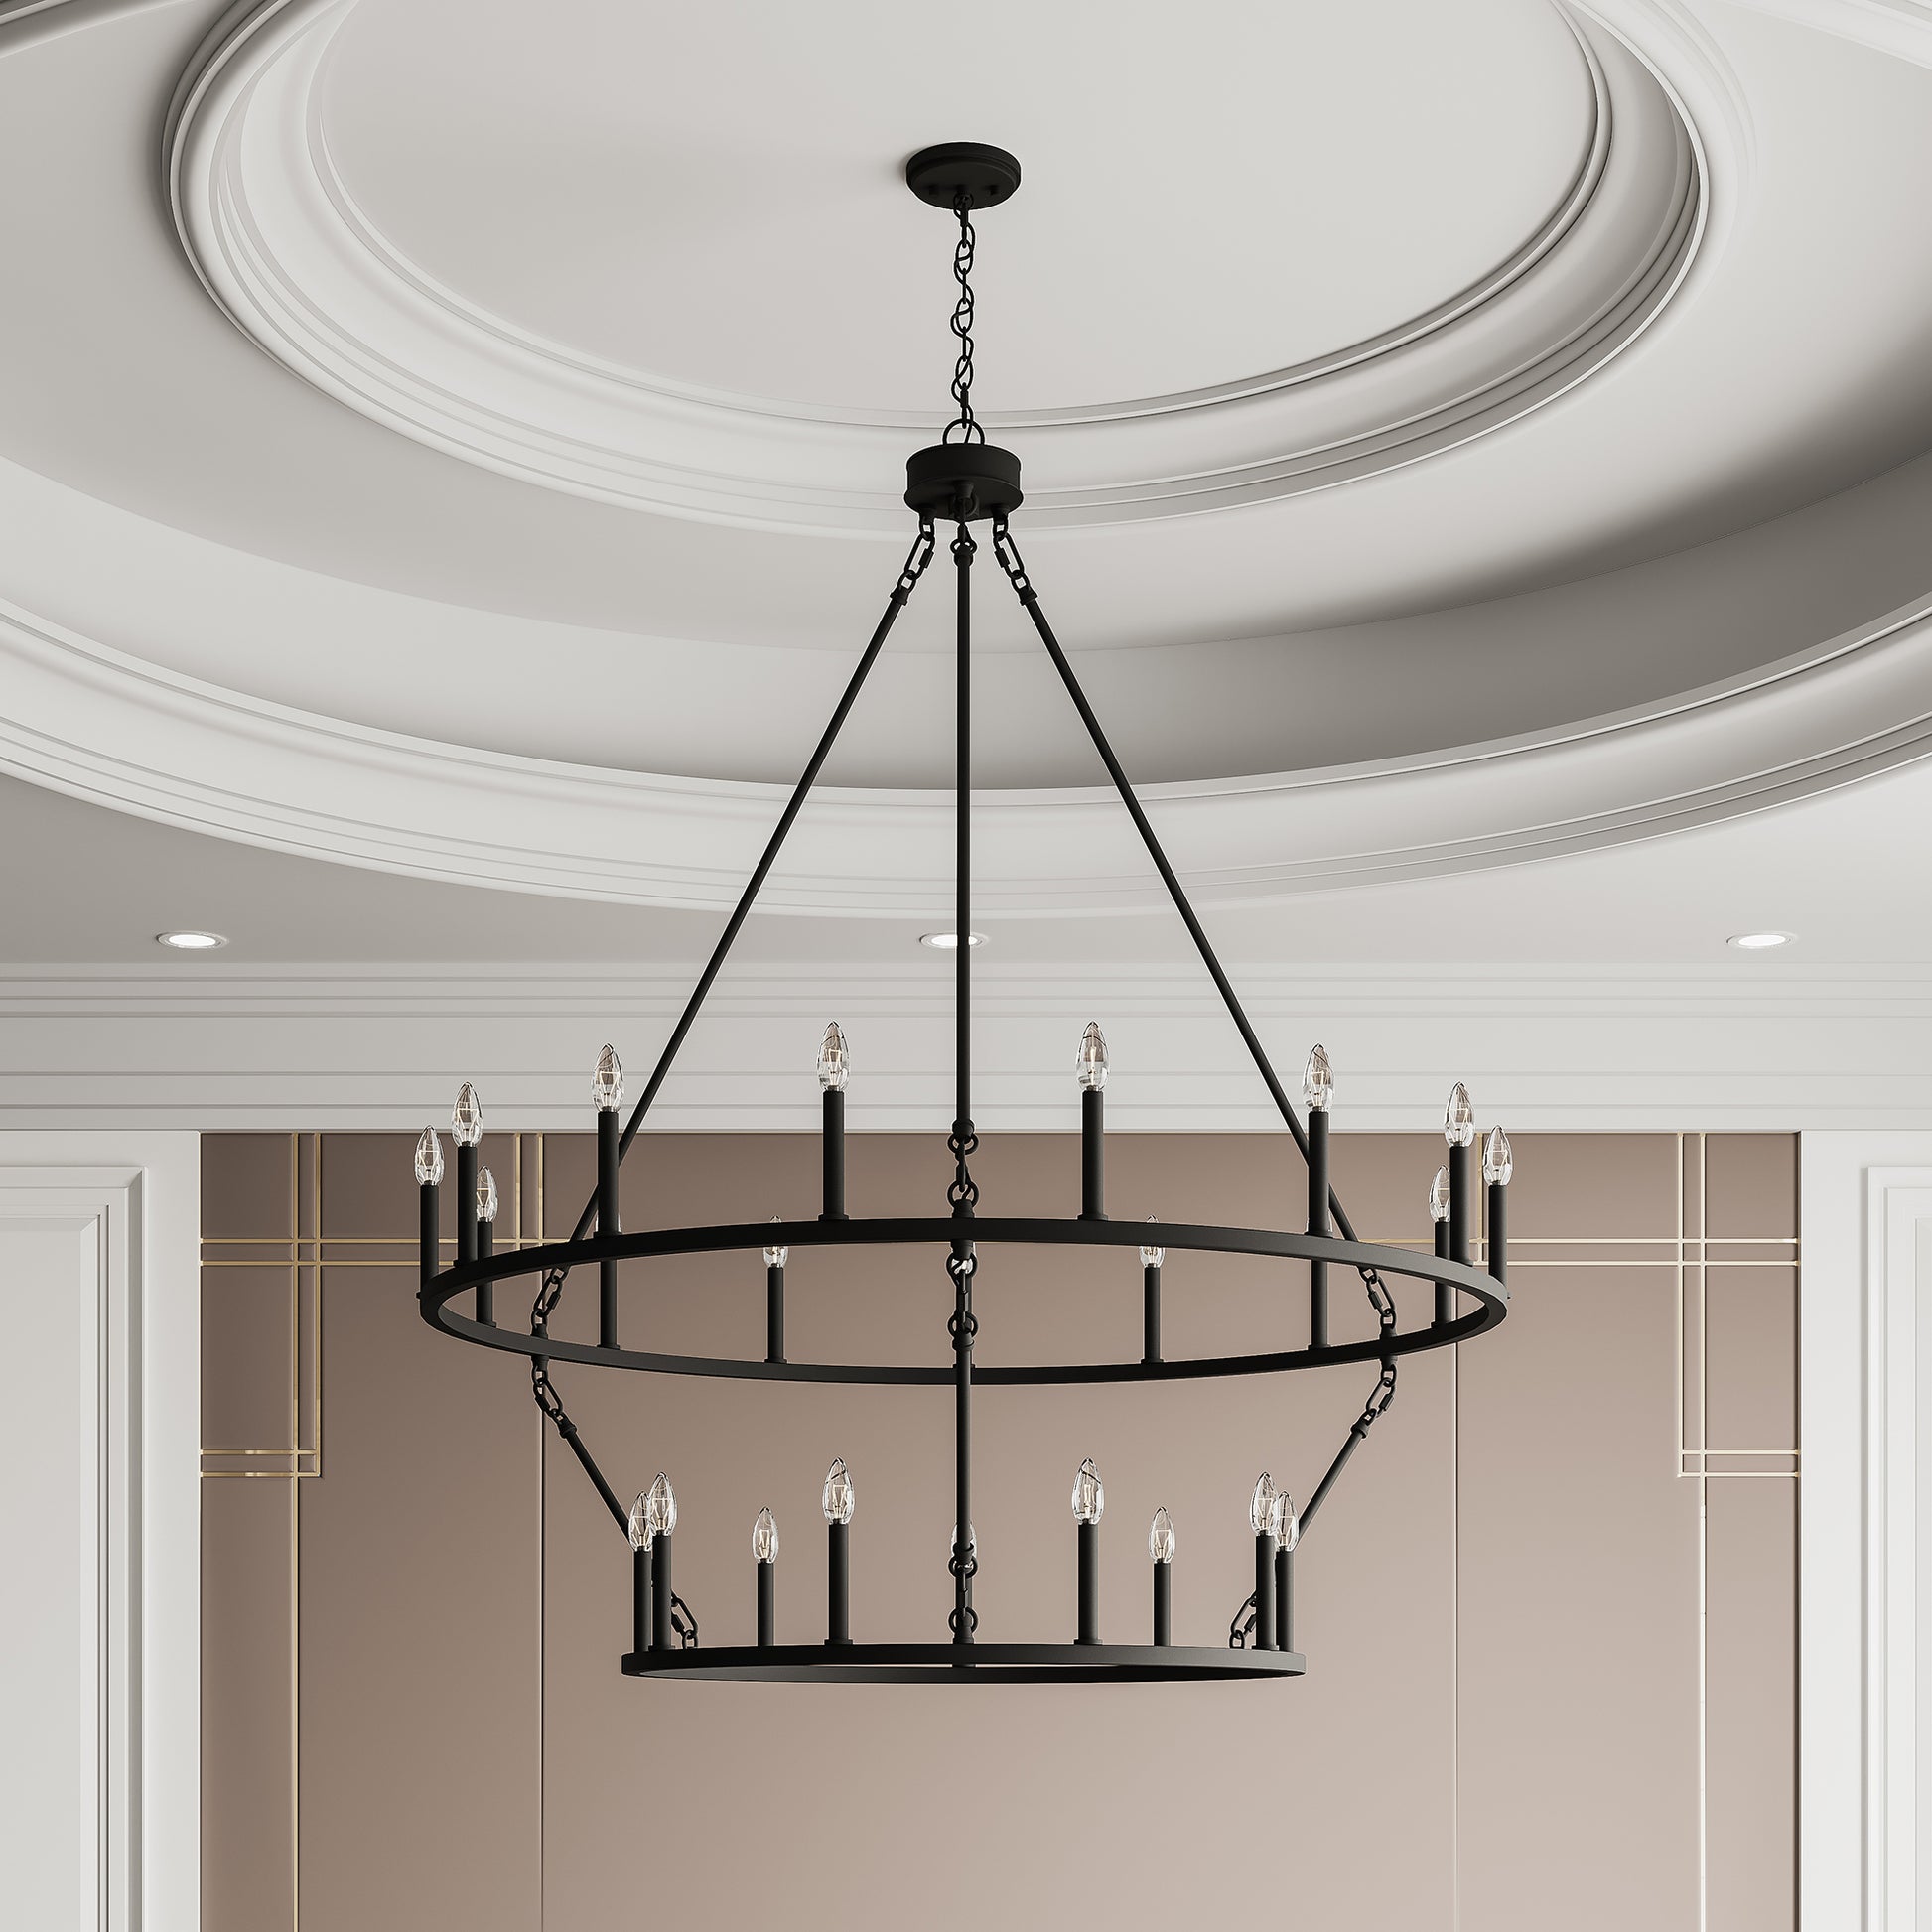 24 light wagon wheel chandelier (4) by ACROMA